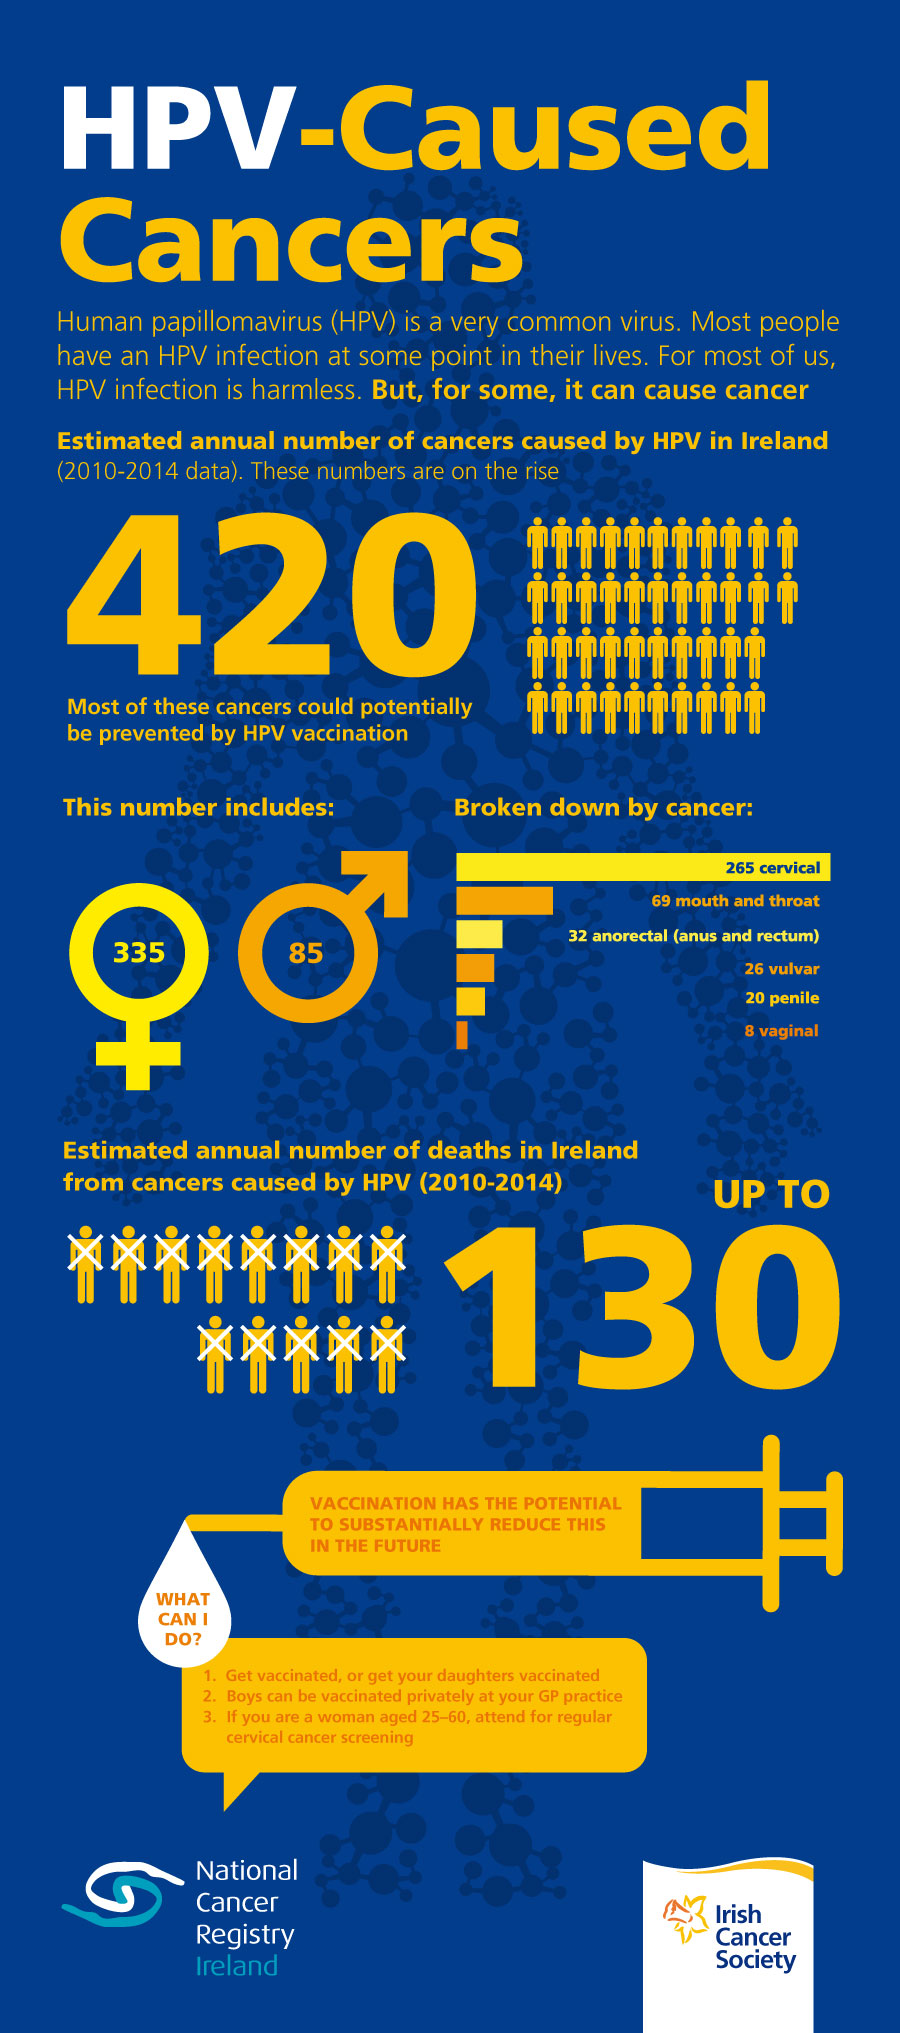 Latest Figures On Hpv Caused Cancers Highlight Urgent Need For Increased Investment To Prevent